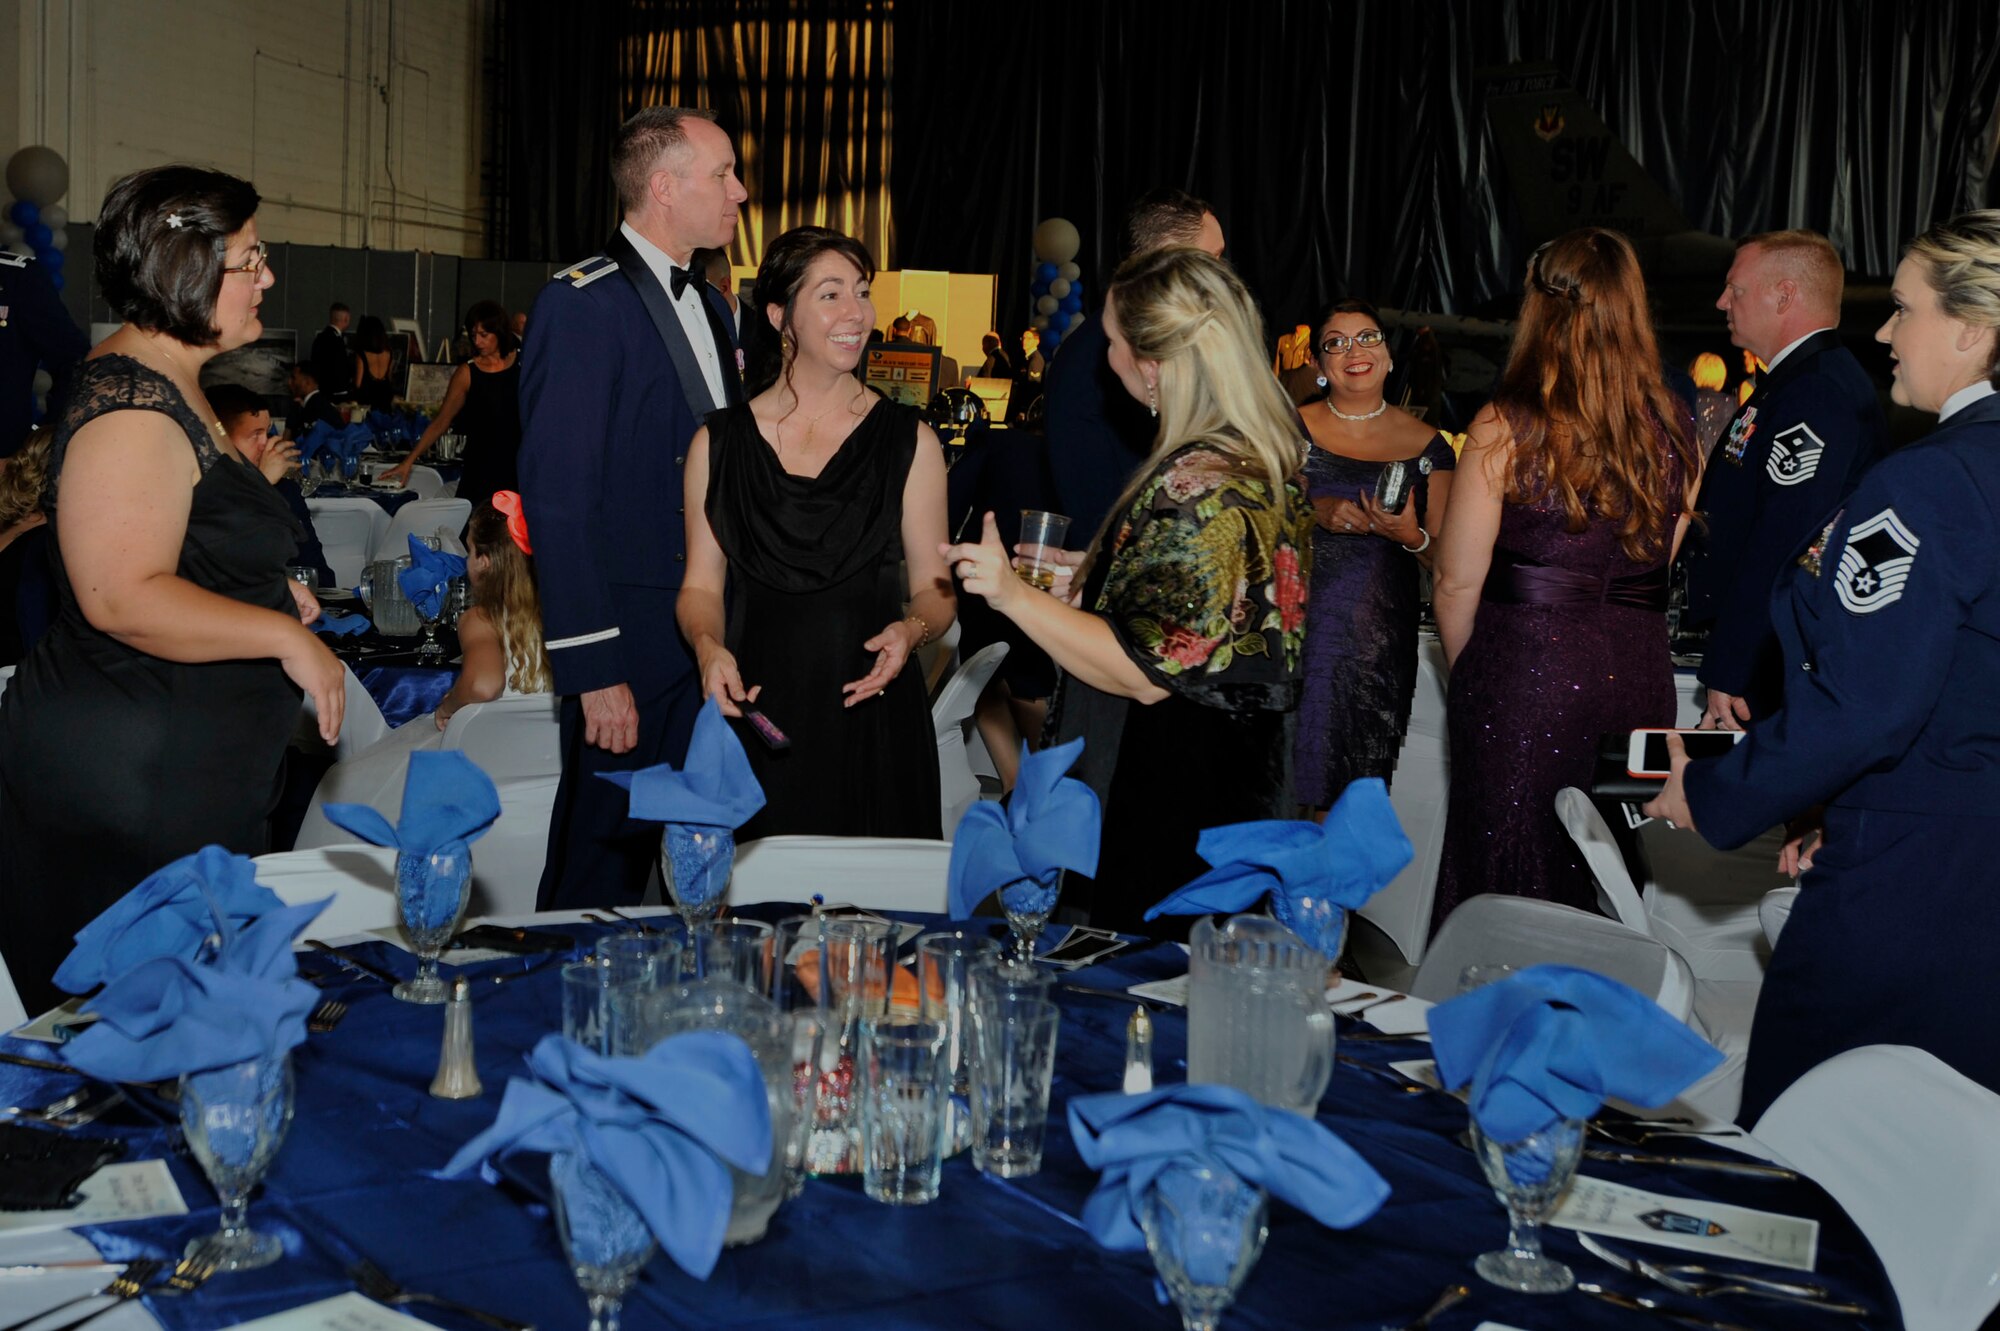 This year the Shaw 2017 Air Force Ball celebrated the Air Force’s 70th birthday.